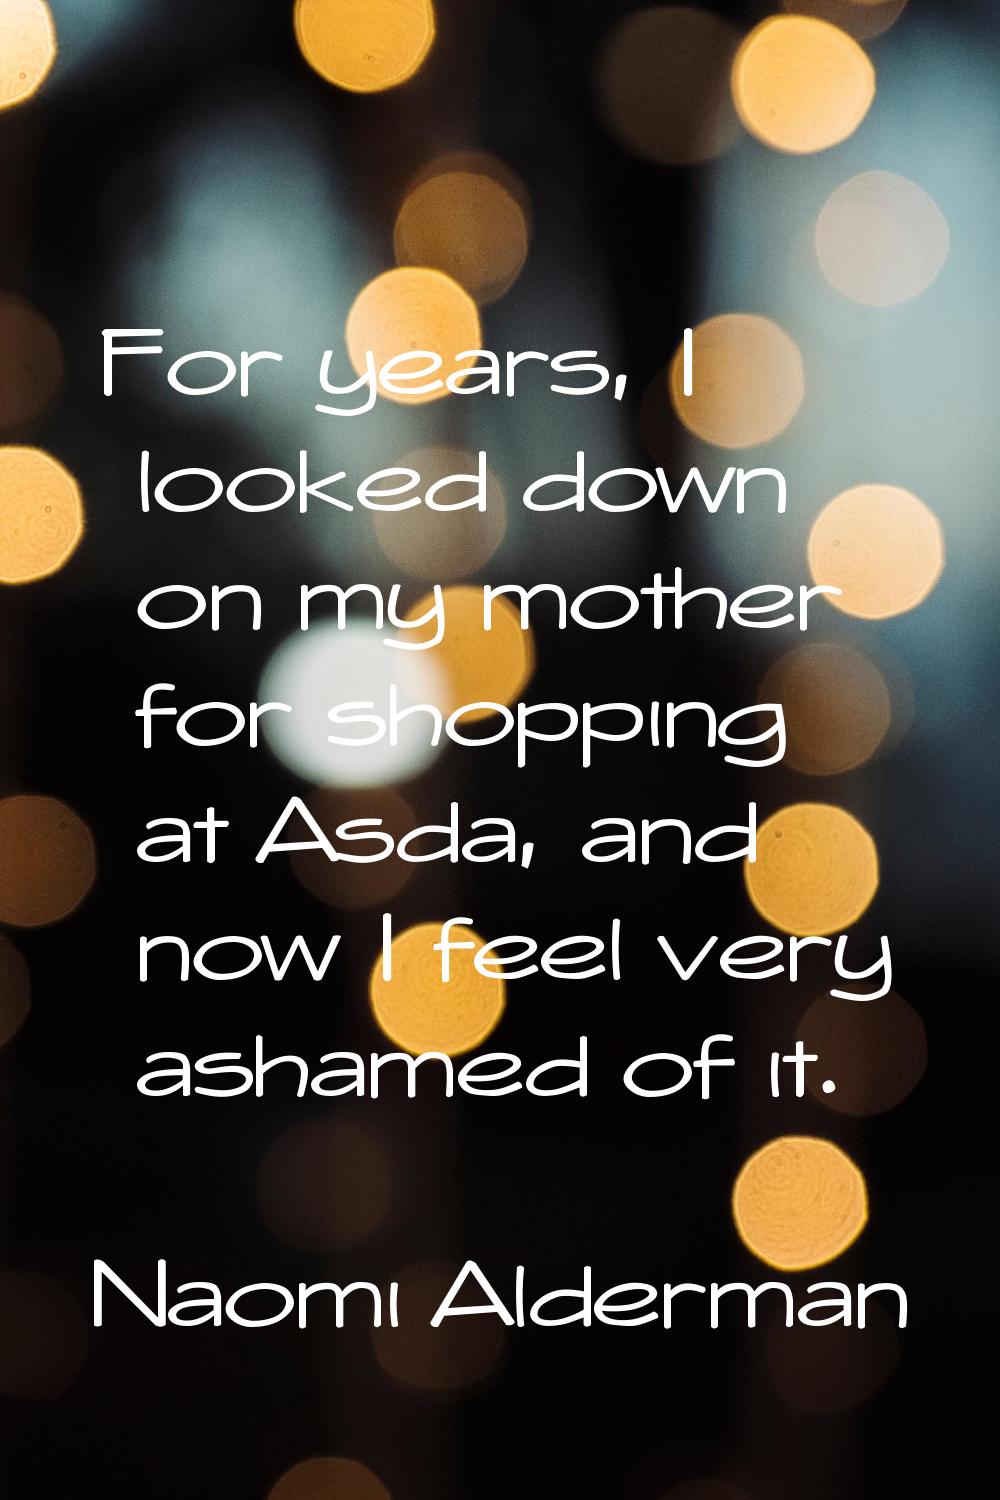 For years, I looked down on my mother for shopping at Asda, and now I feel very ashamed of it.